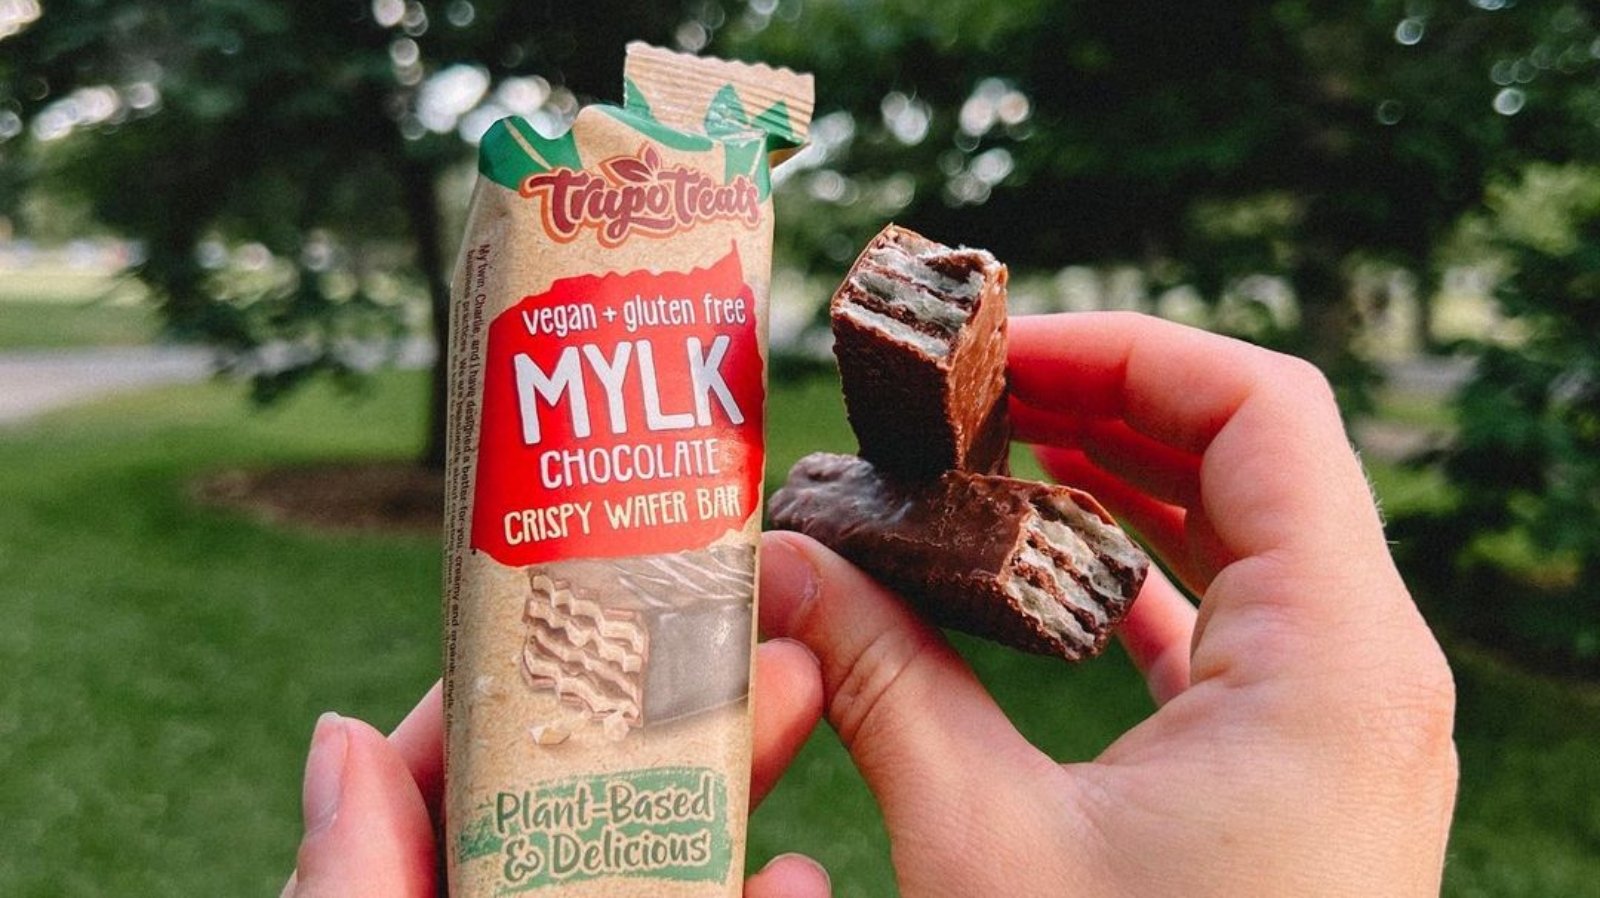 A person's hands holding a vegan, gluten-free chocolate wafer bar by Trupo Treats